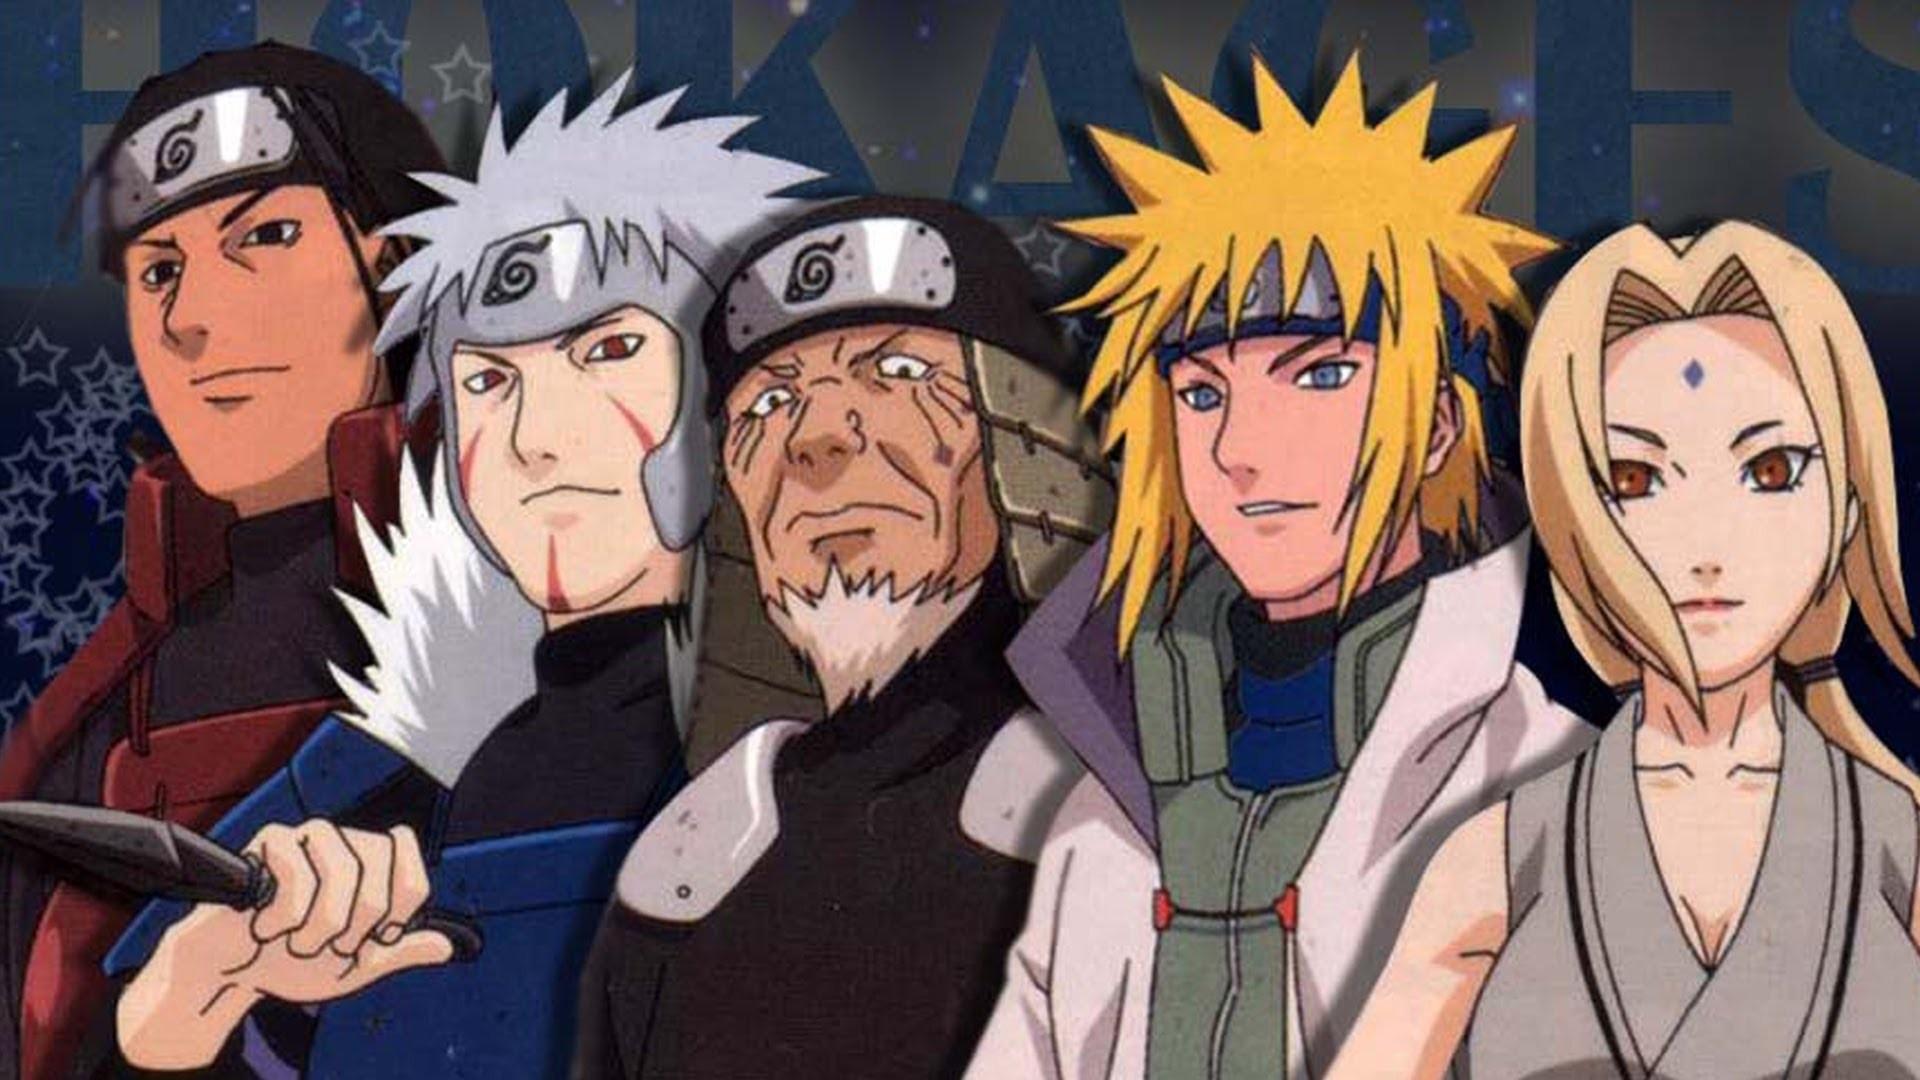 Hokages on stage Wallpaper (1920x1080)